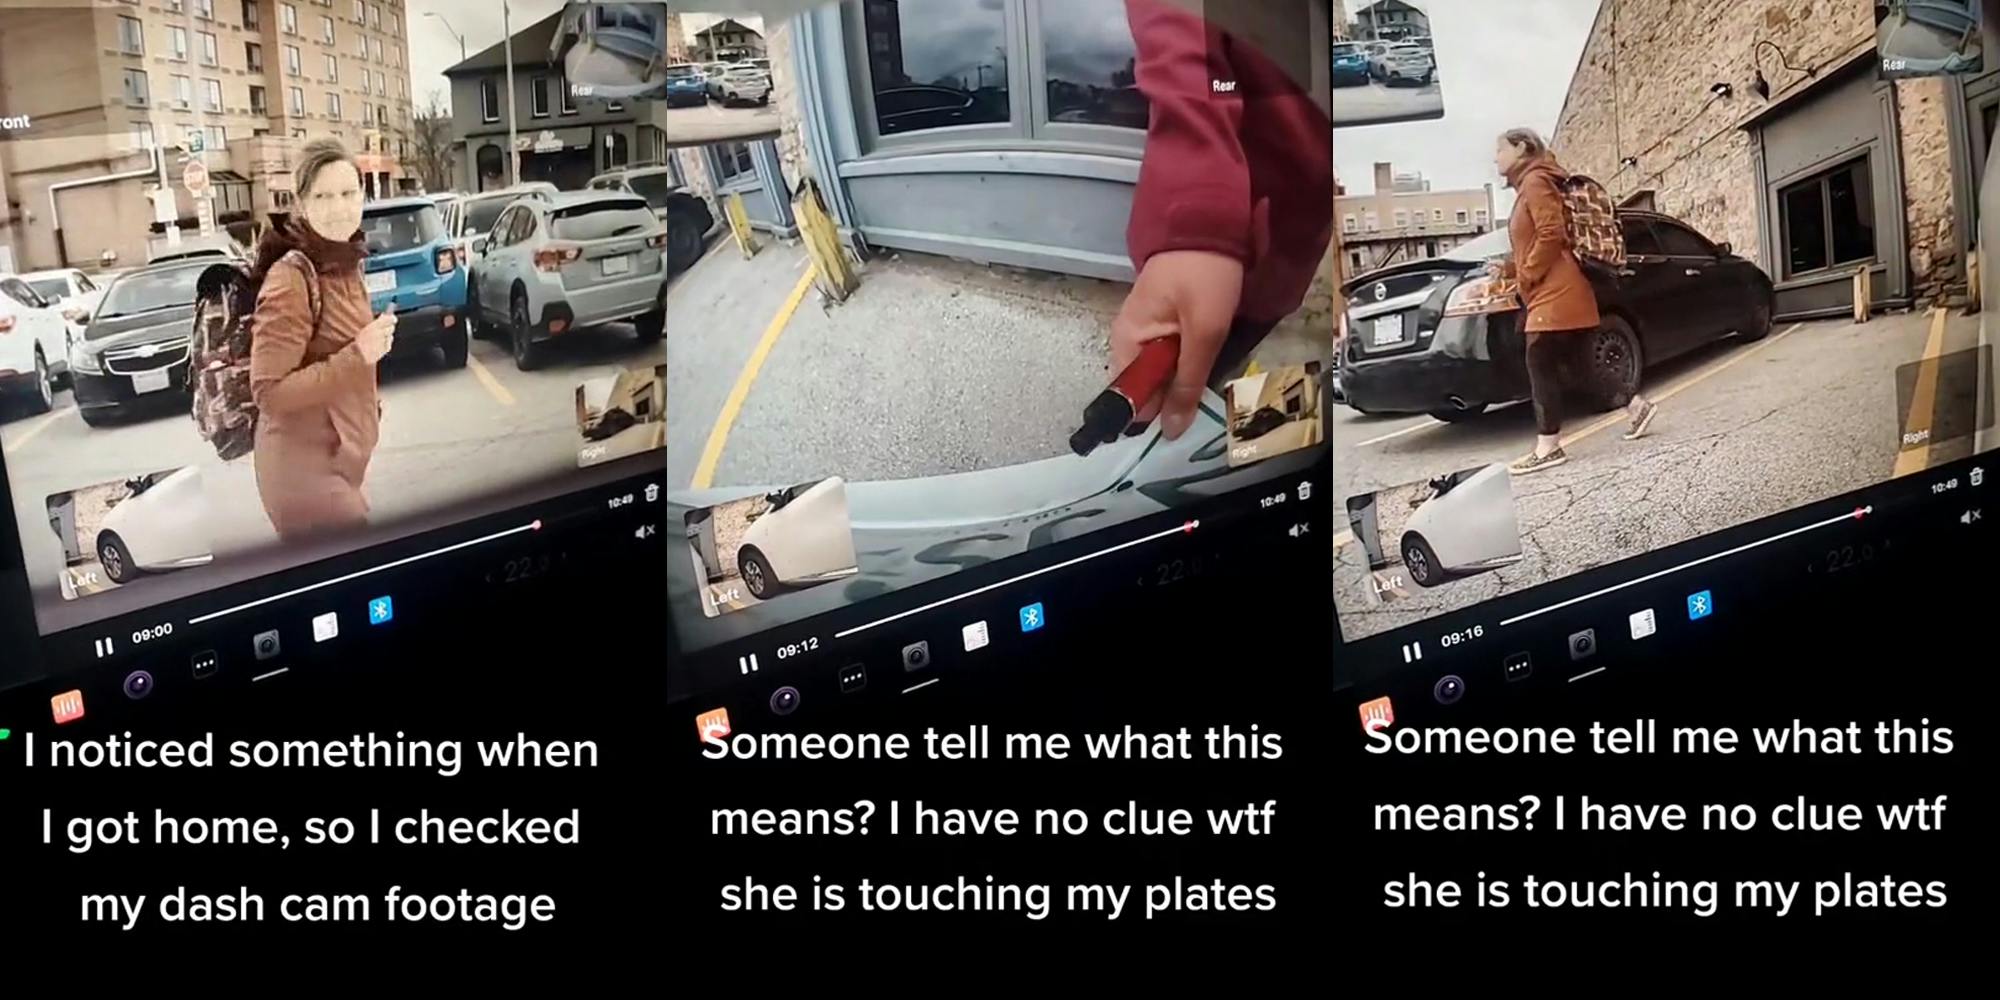 woman seen in Tesla dash cam footage with caption "I noticed something when I got home, so I checked my dash cam footage" (l) woman seen in Tesla dash cam footage bending plate with caption "Someone tell me what this means? I have no clue wtf she is touching my plates" (c) woman seen in Tesla dash cam footage with caption "Someone tell me what this means? I have no clue wtf she is touching my plates" (r)